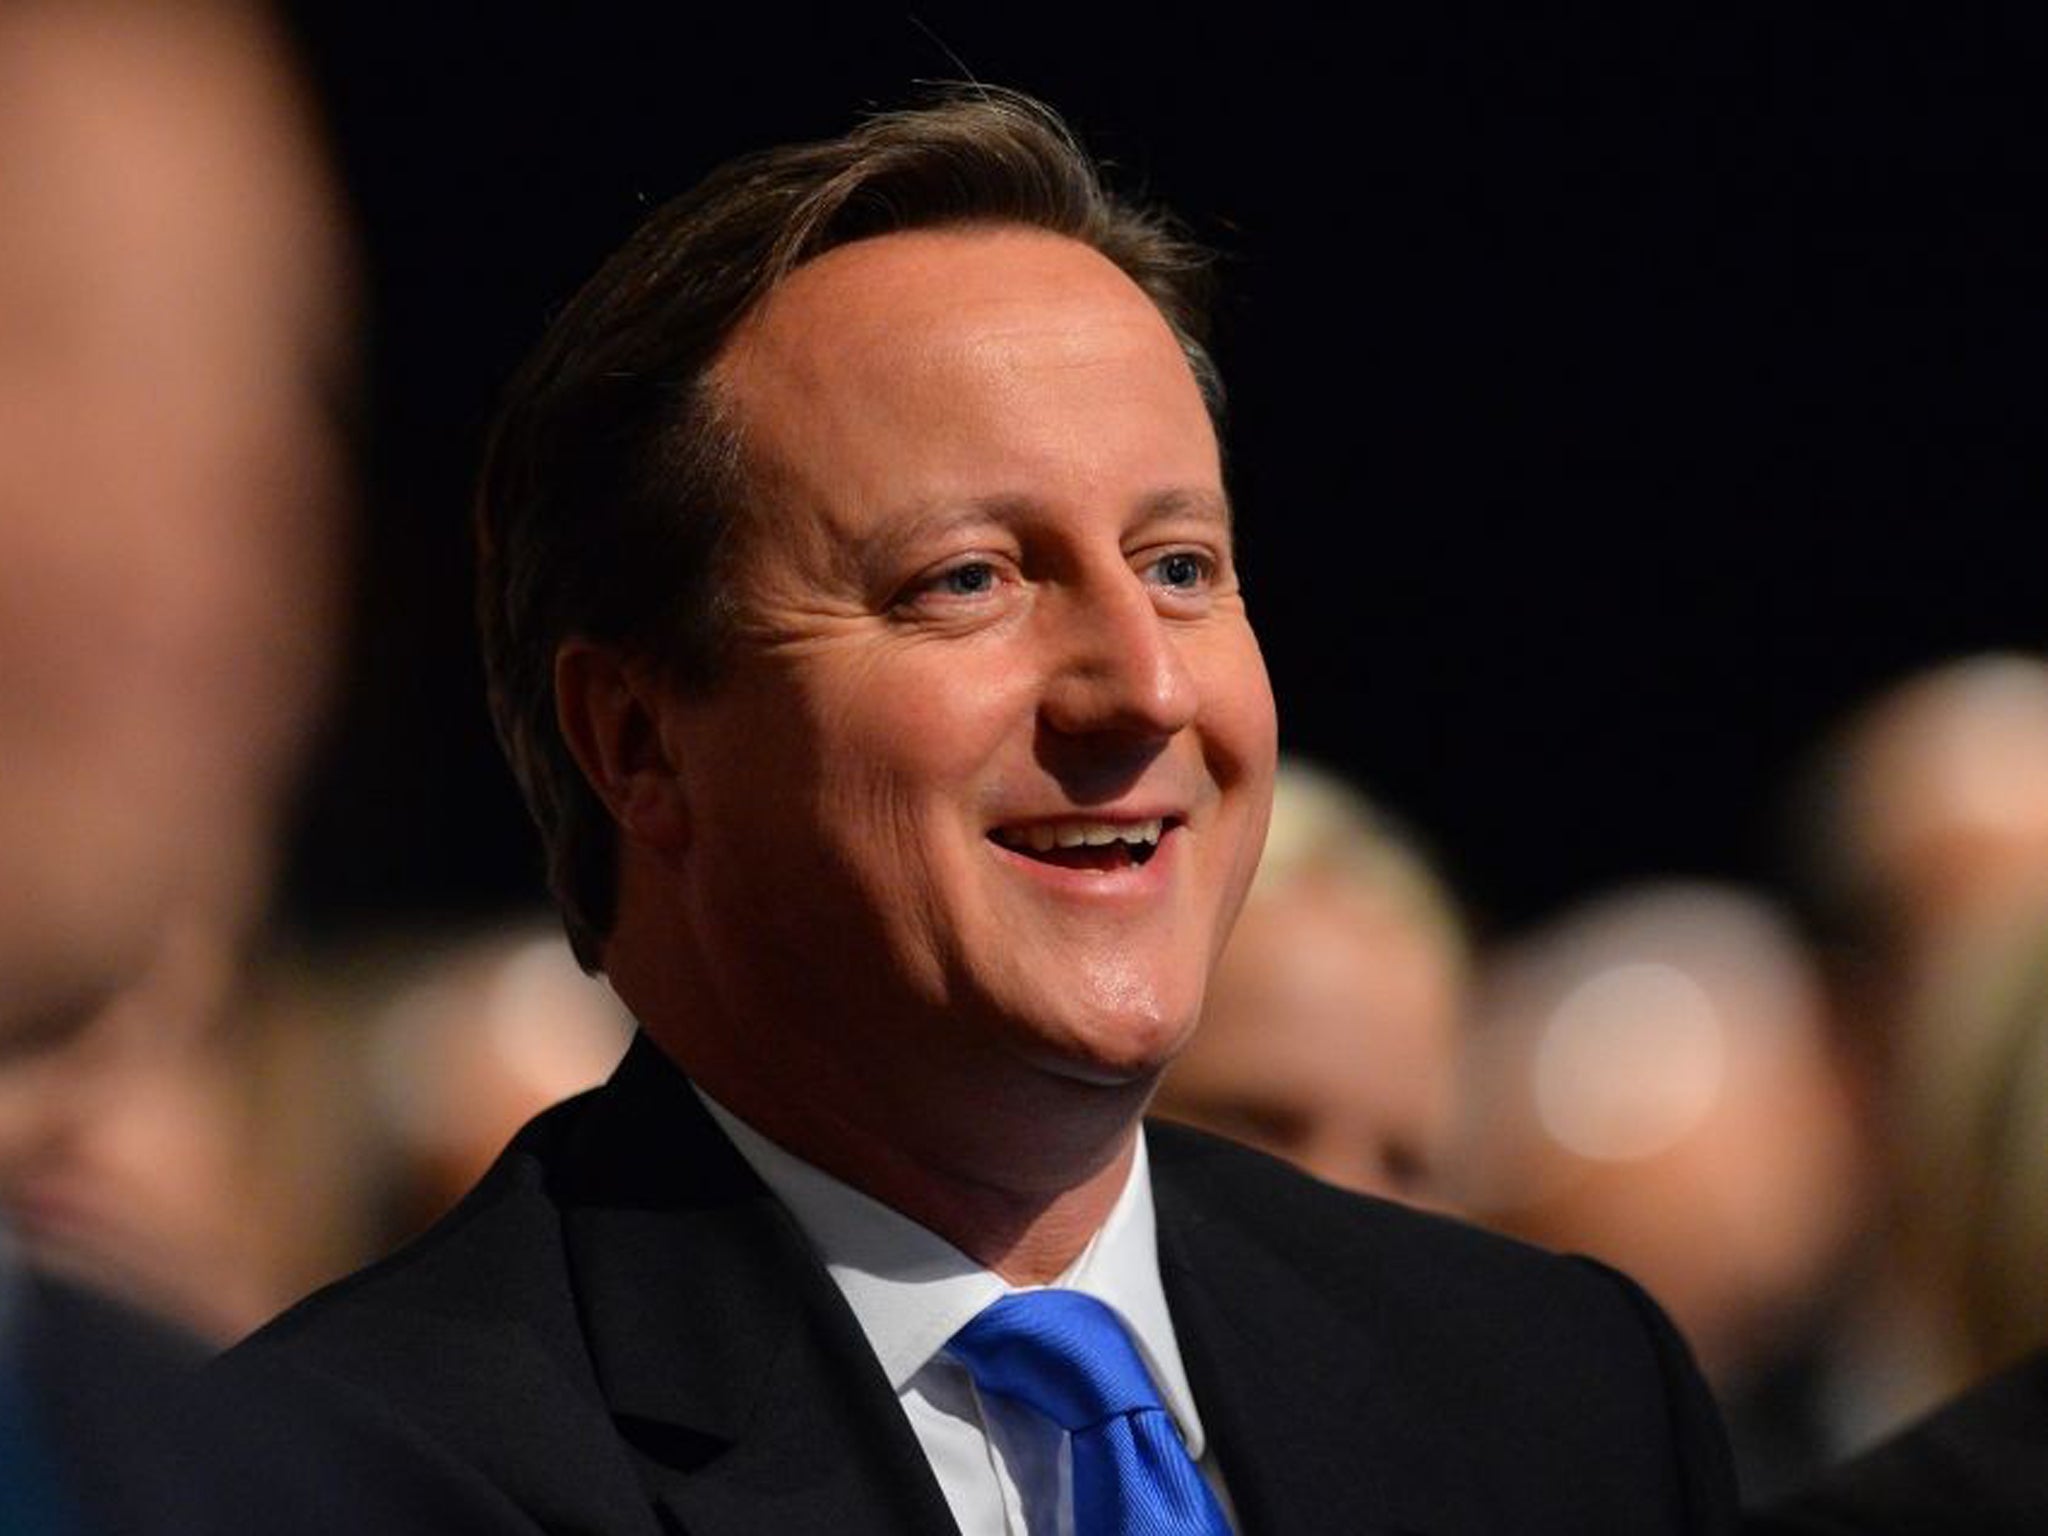 David Cameron has defended plans for more seven years of austerity